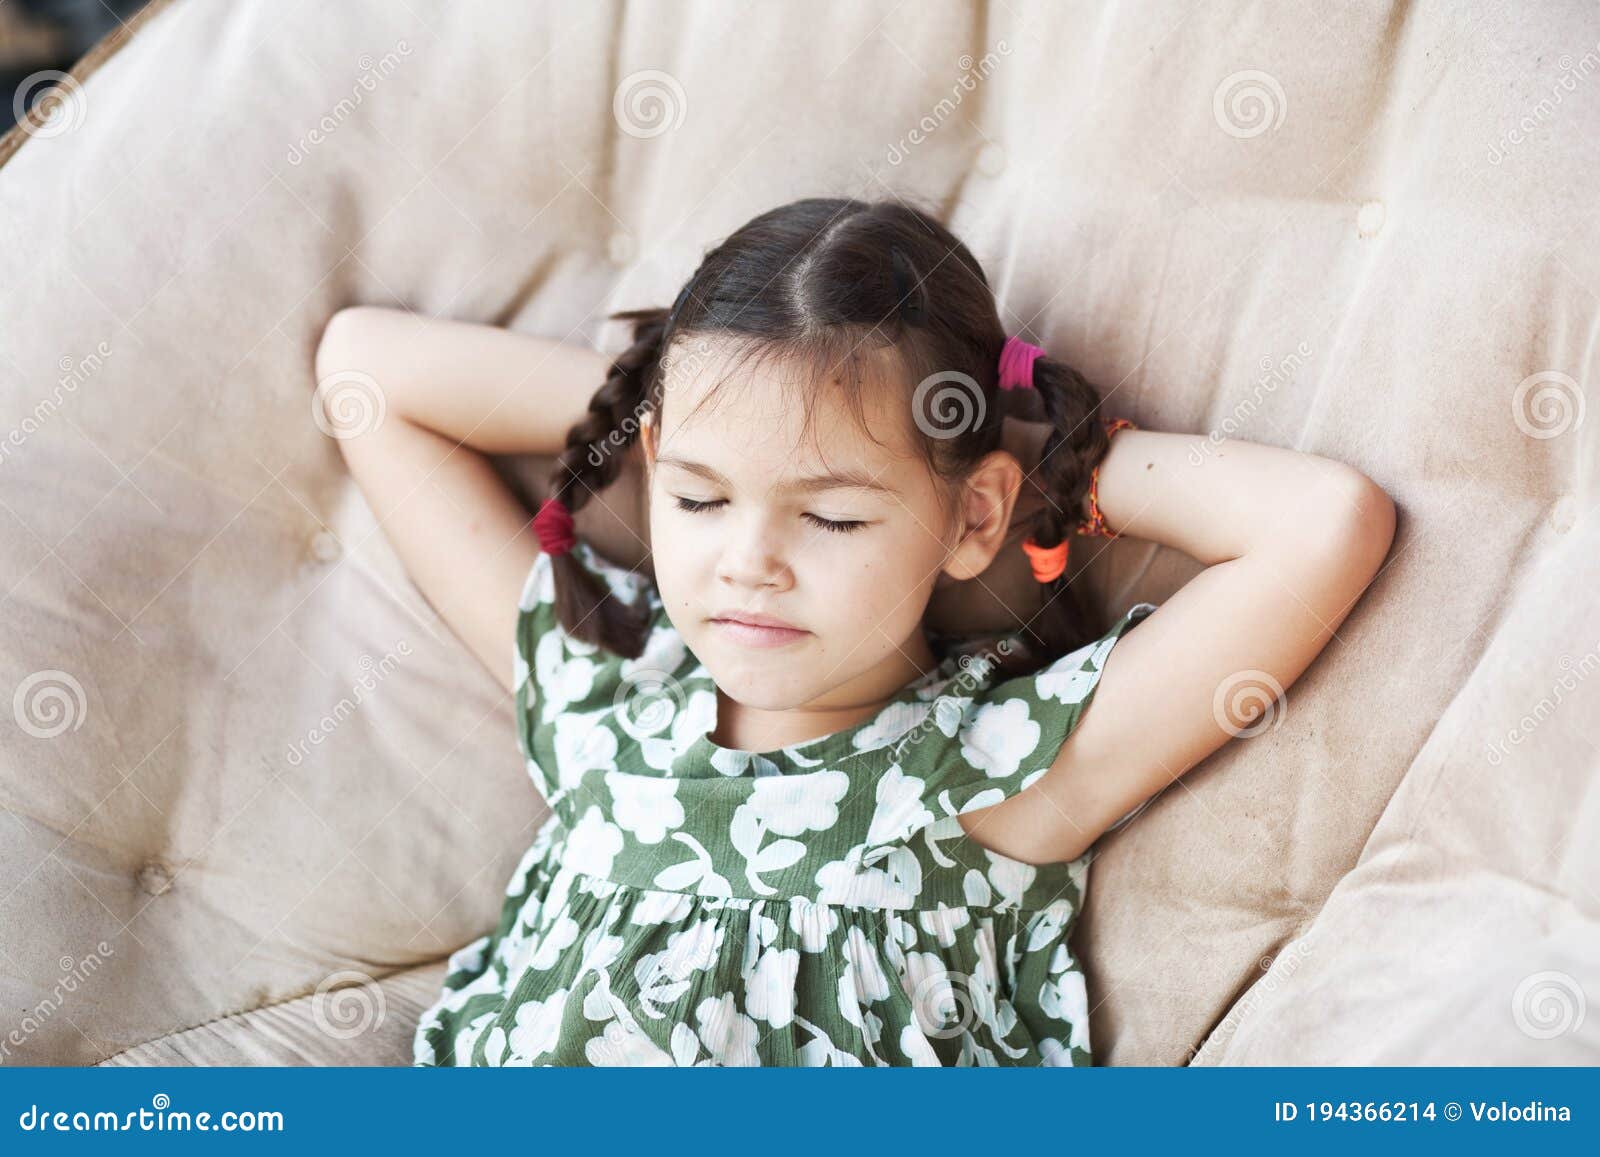 Asian Child Resting in a Chair Stock Photo - Image of light, little ...